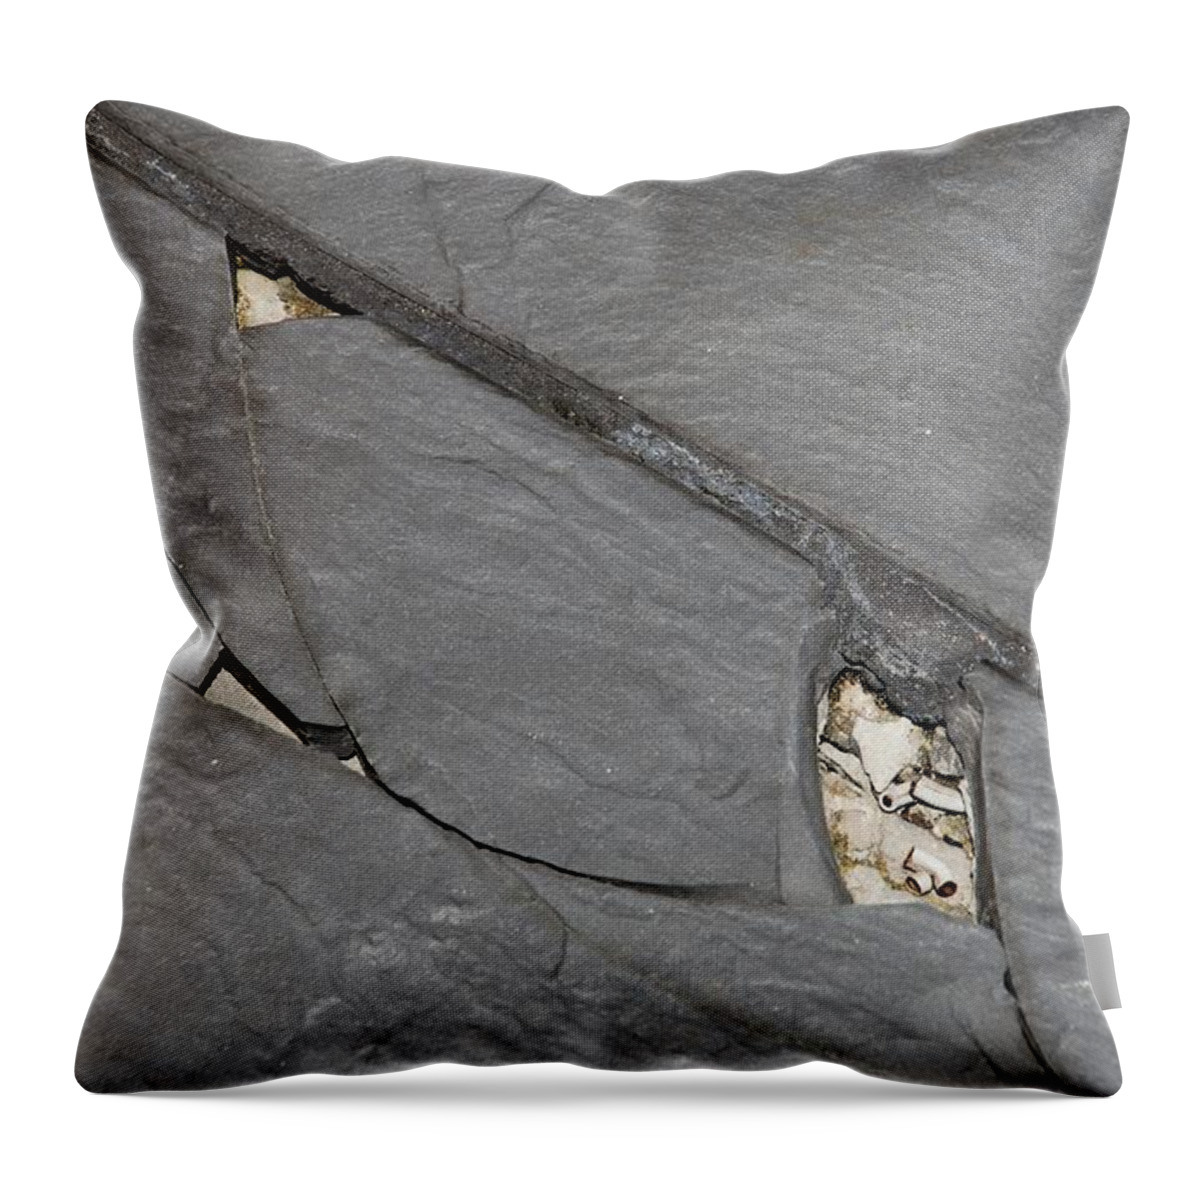 Sculptures Throw Pillow featuring the photograph Cracked Slate by Rob Hans